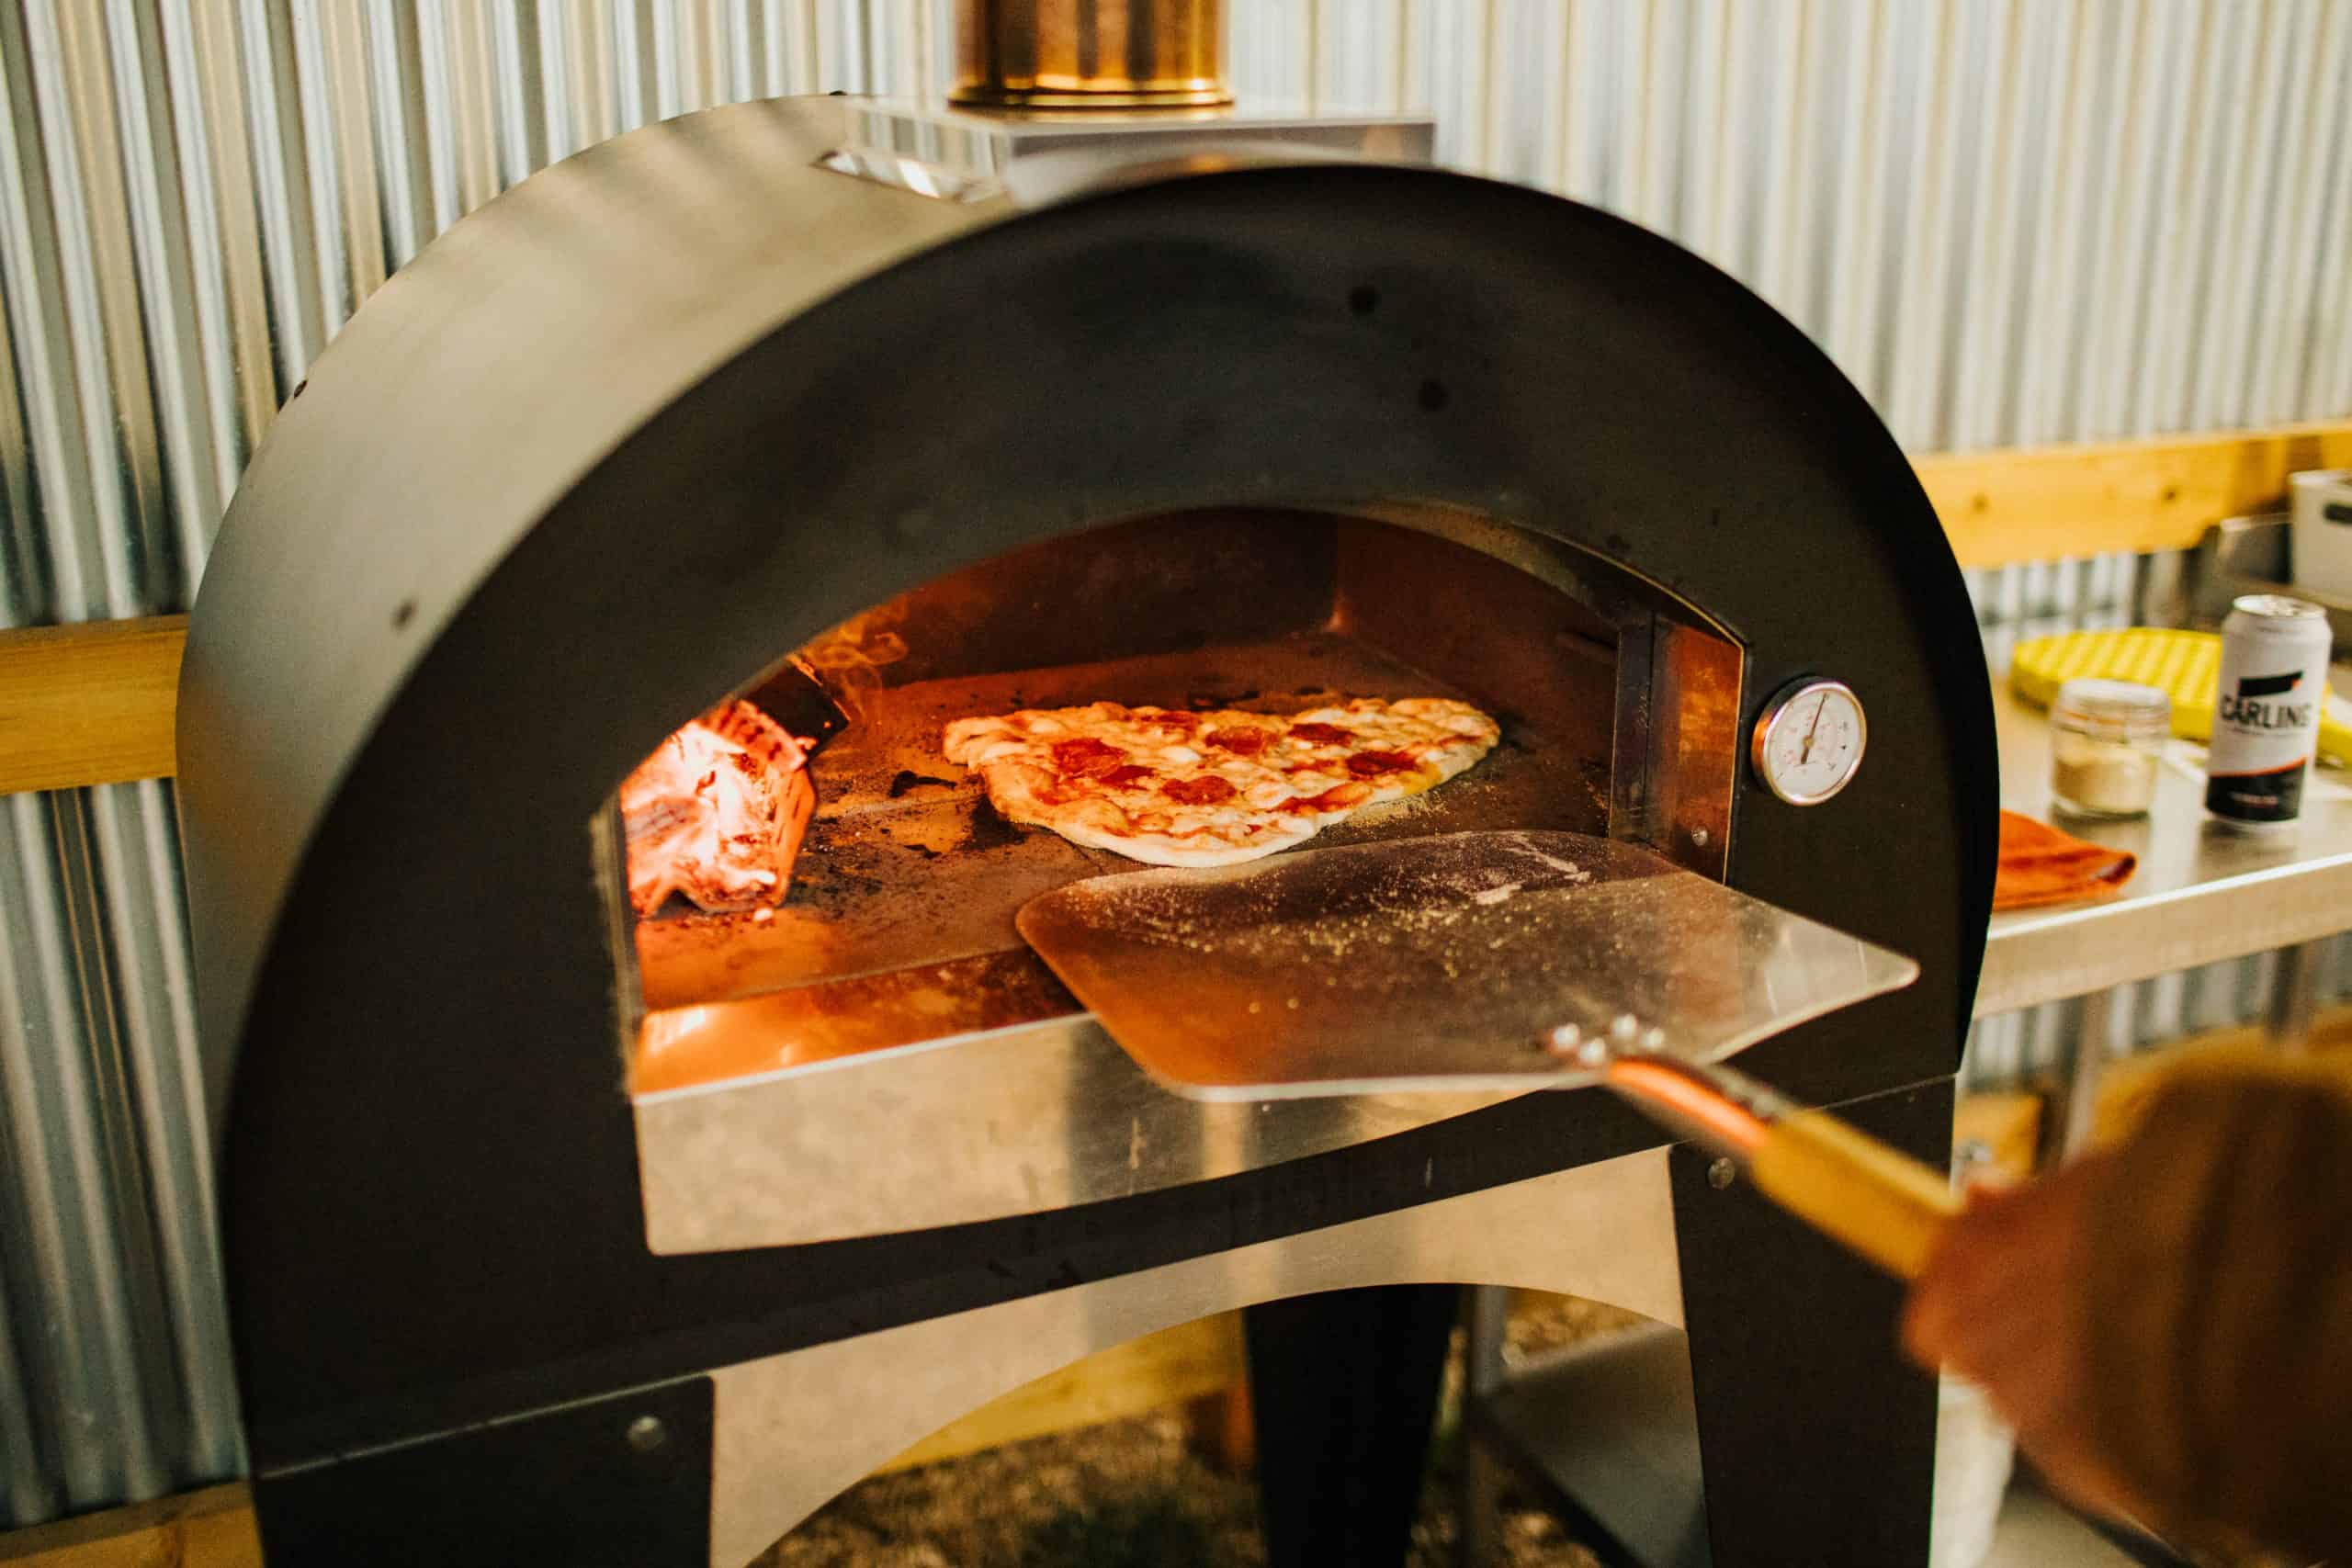 How to Clean a Wood-Fired Pizza Oven